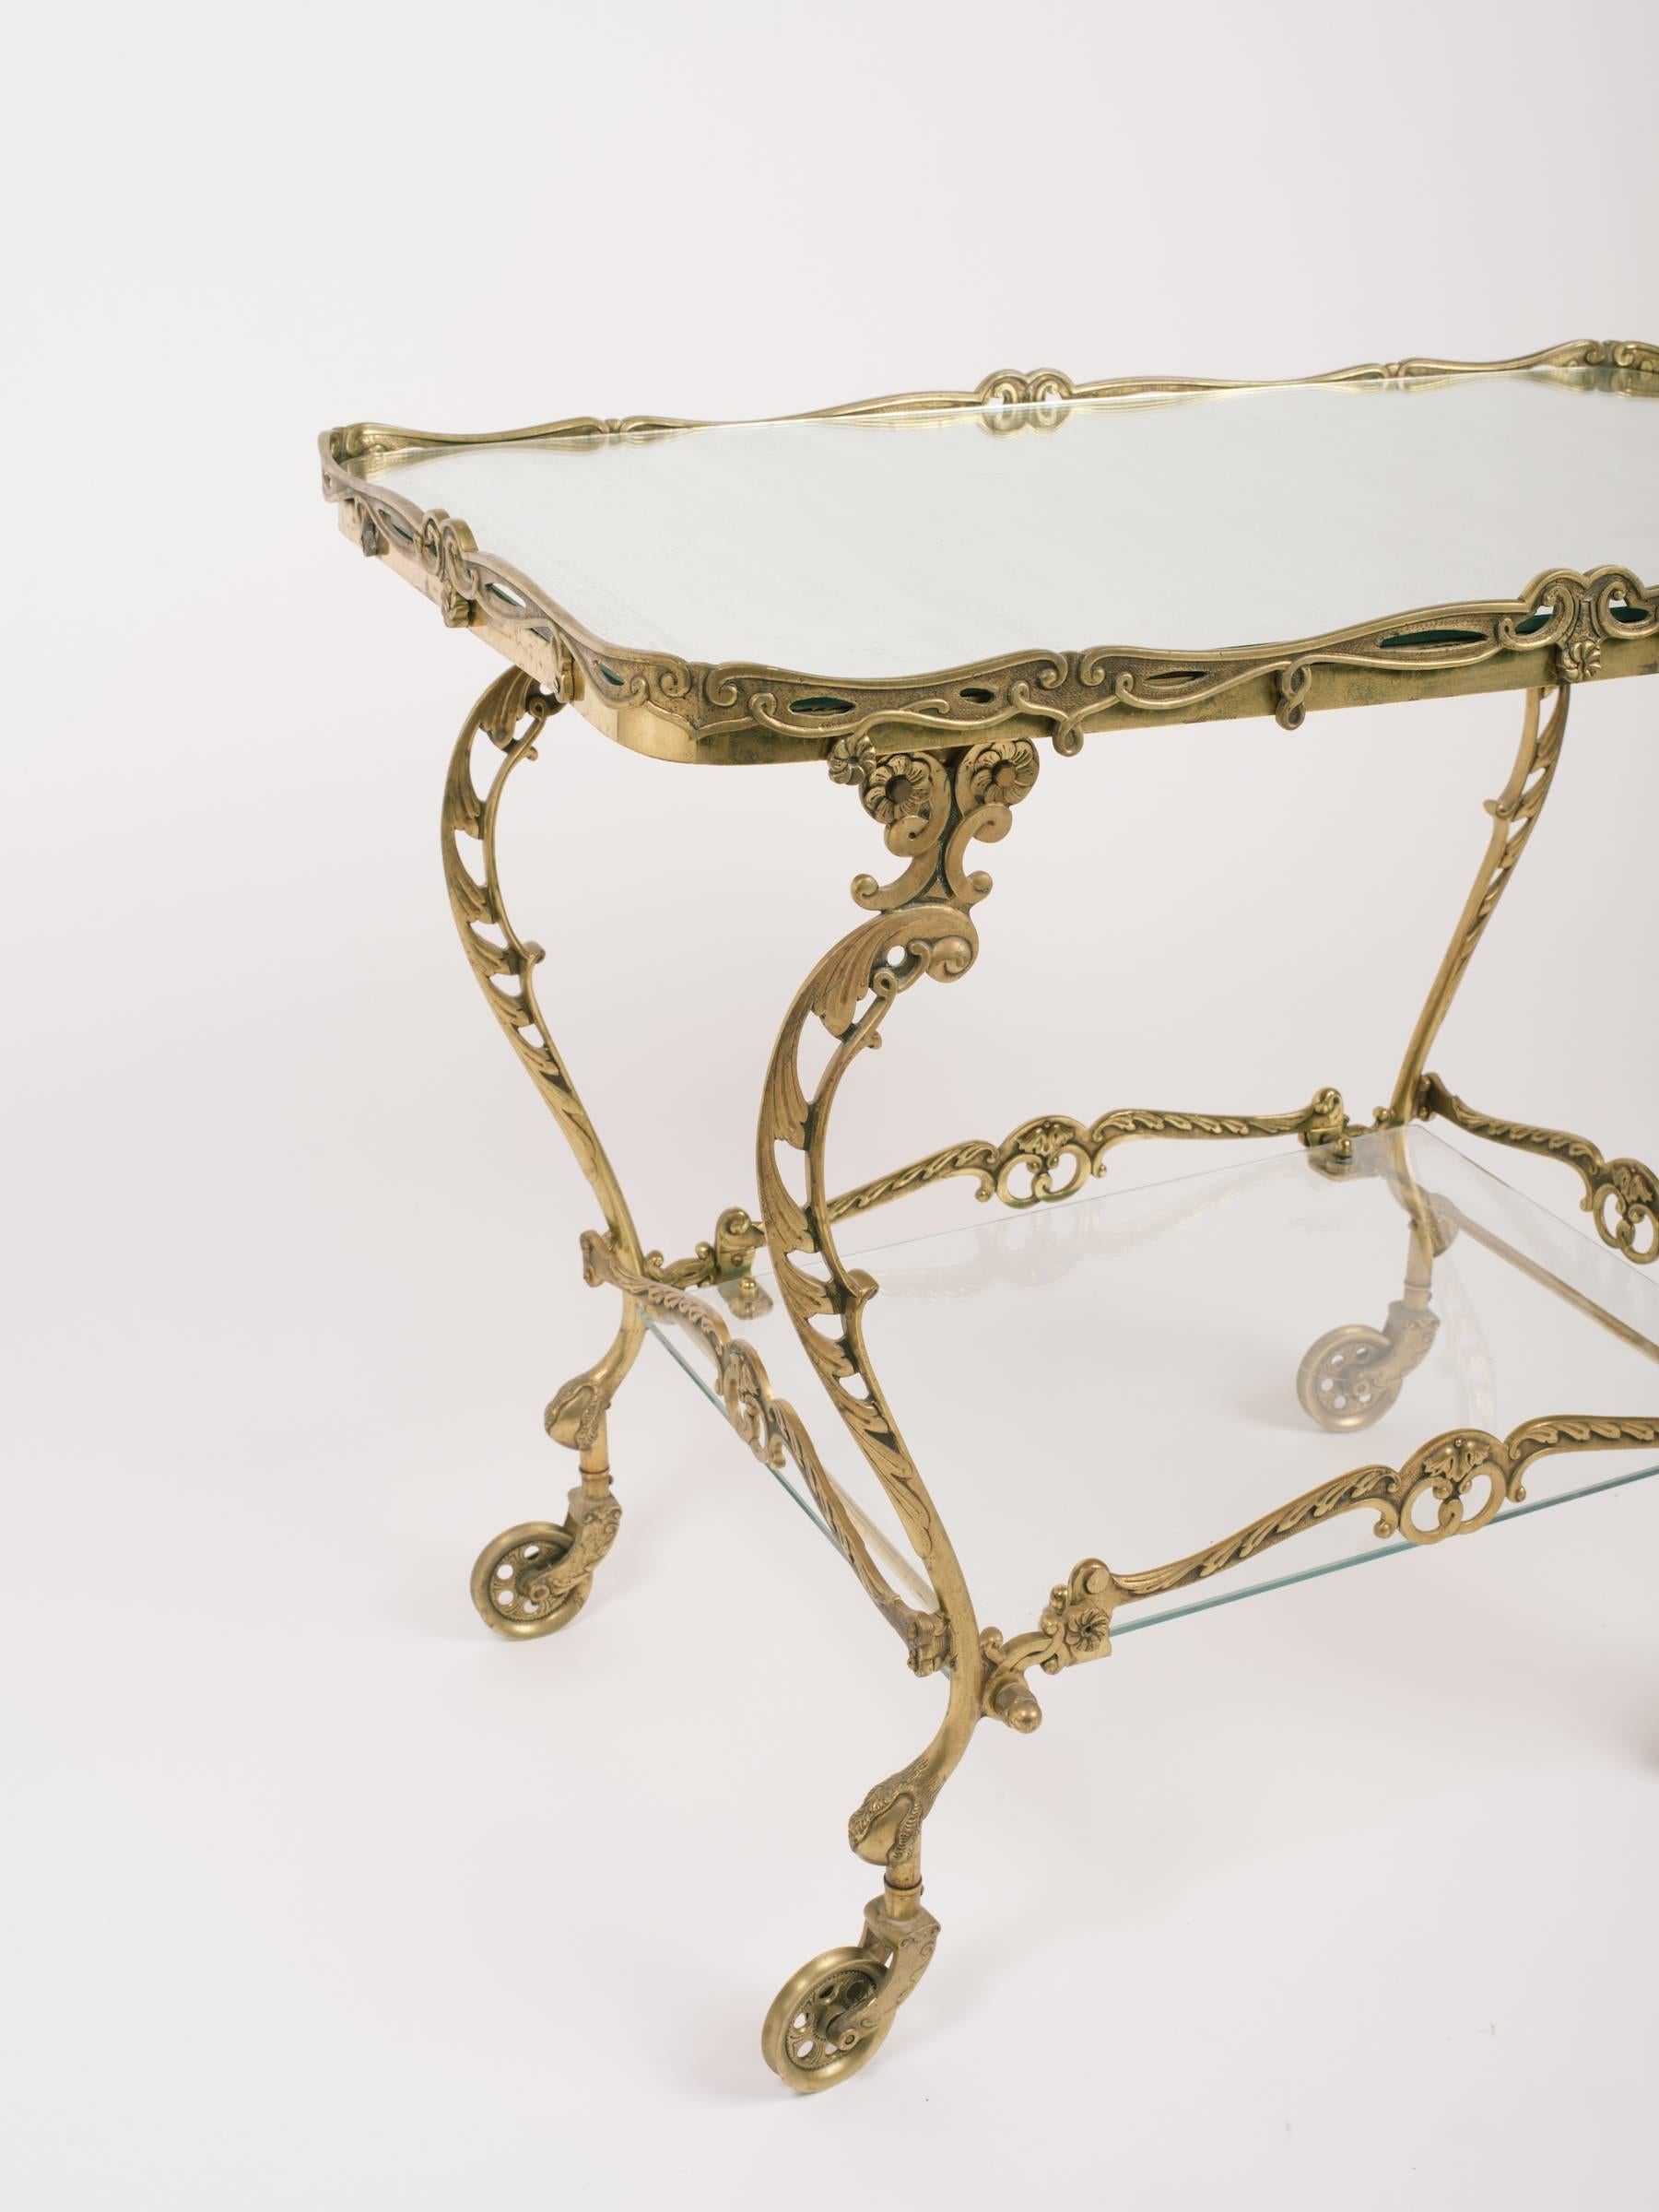 1950s Art Nouveau style brass tea cart made in Portugal from Saks Fifth Avenue. Mirrored top, glass bottom.